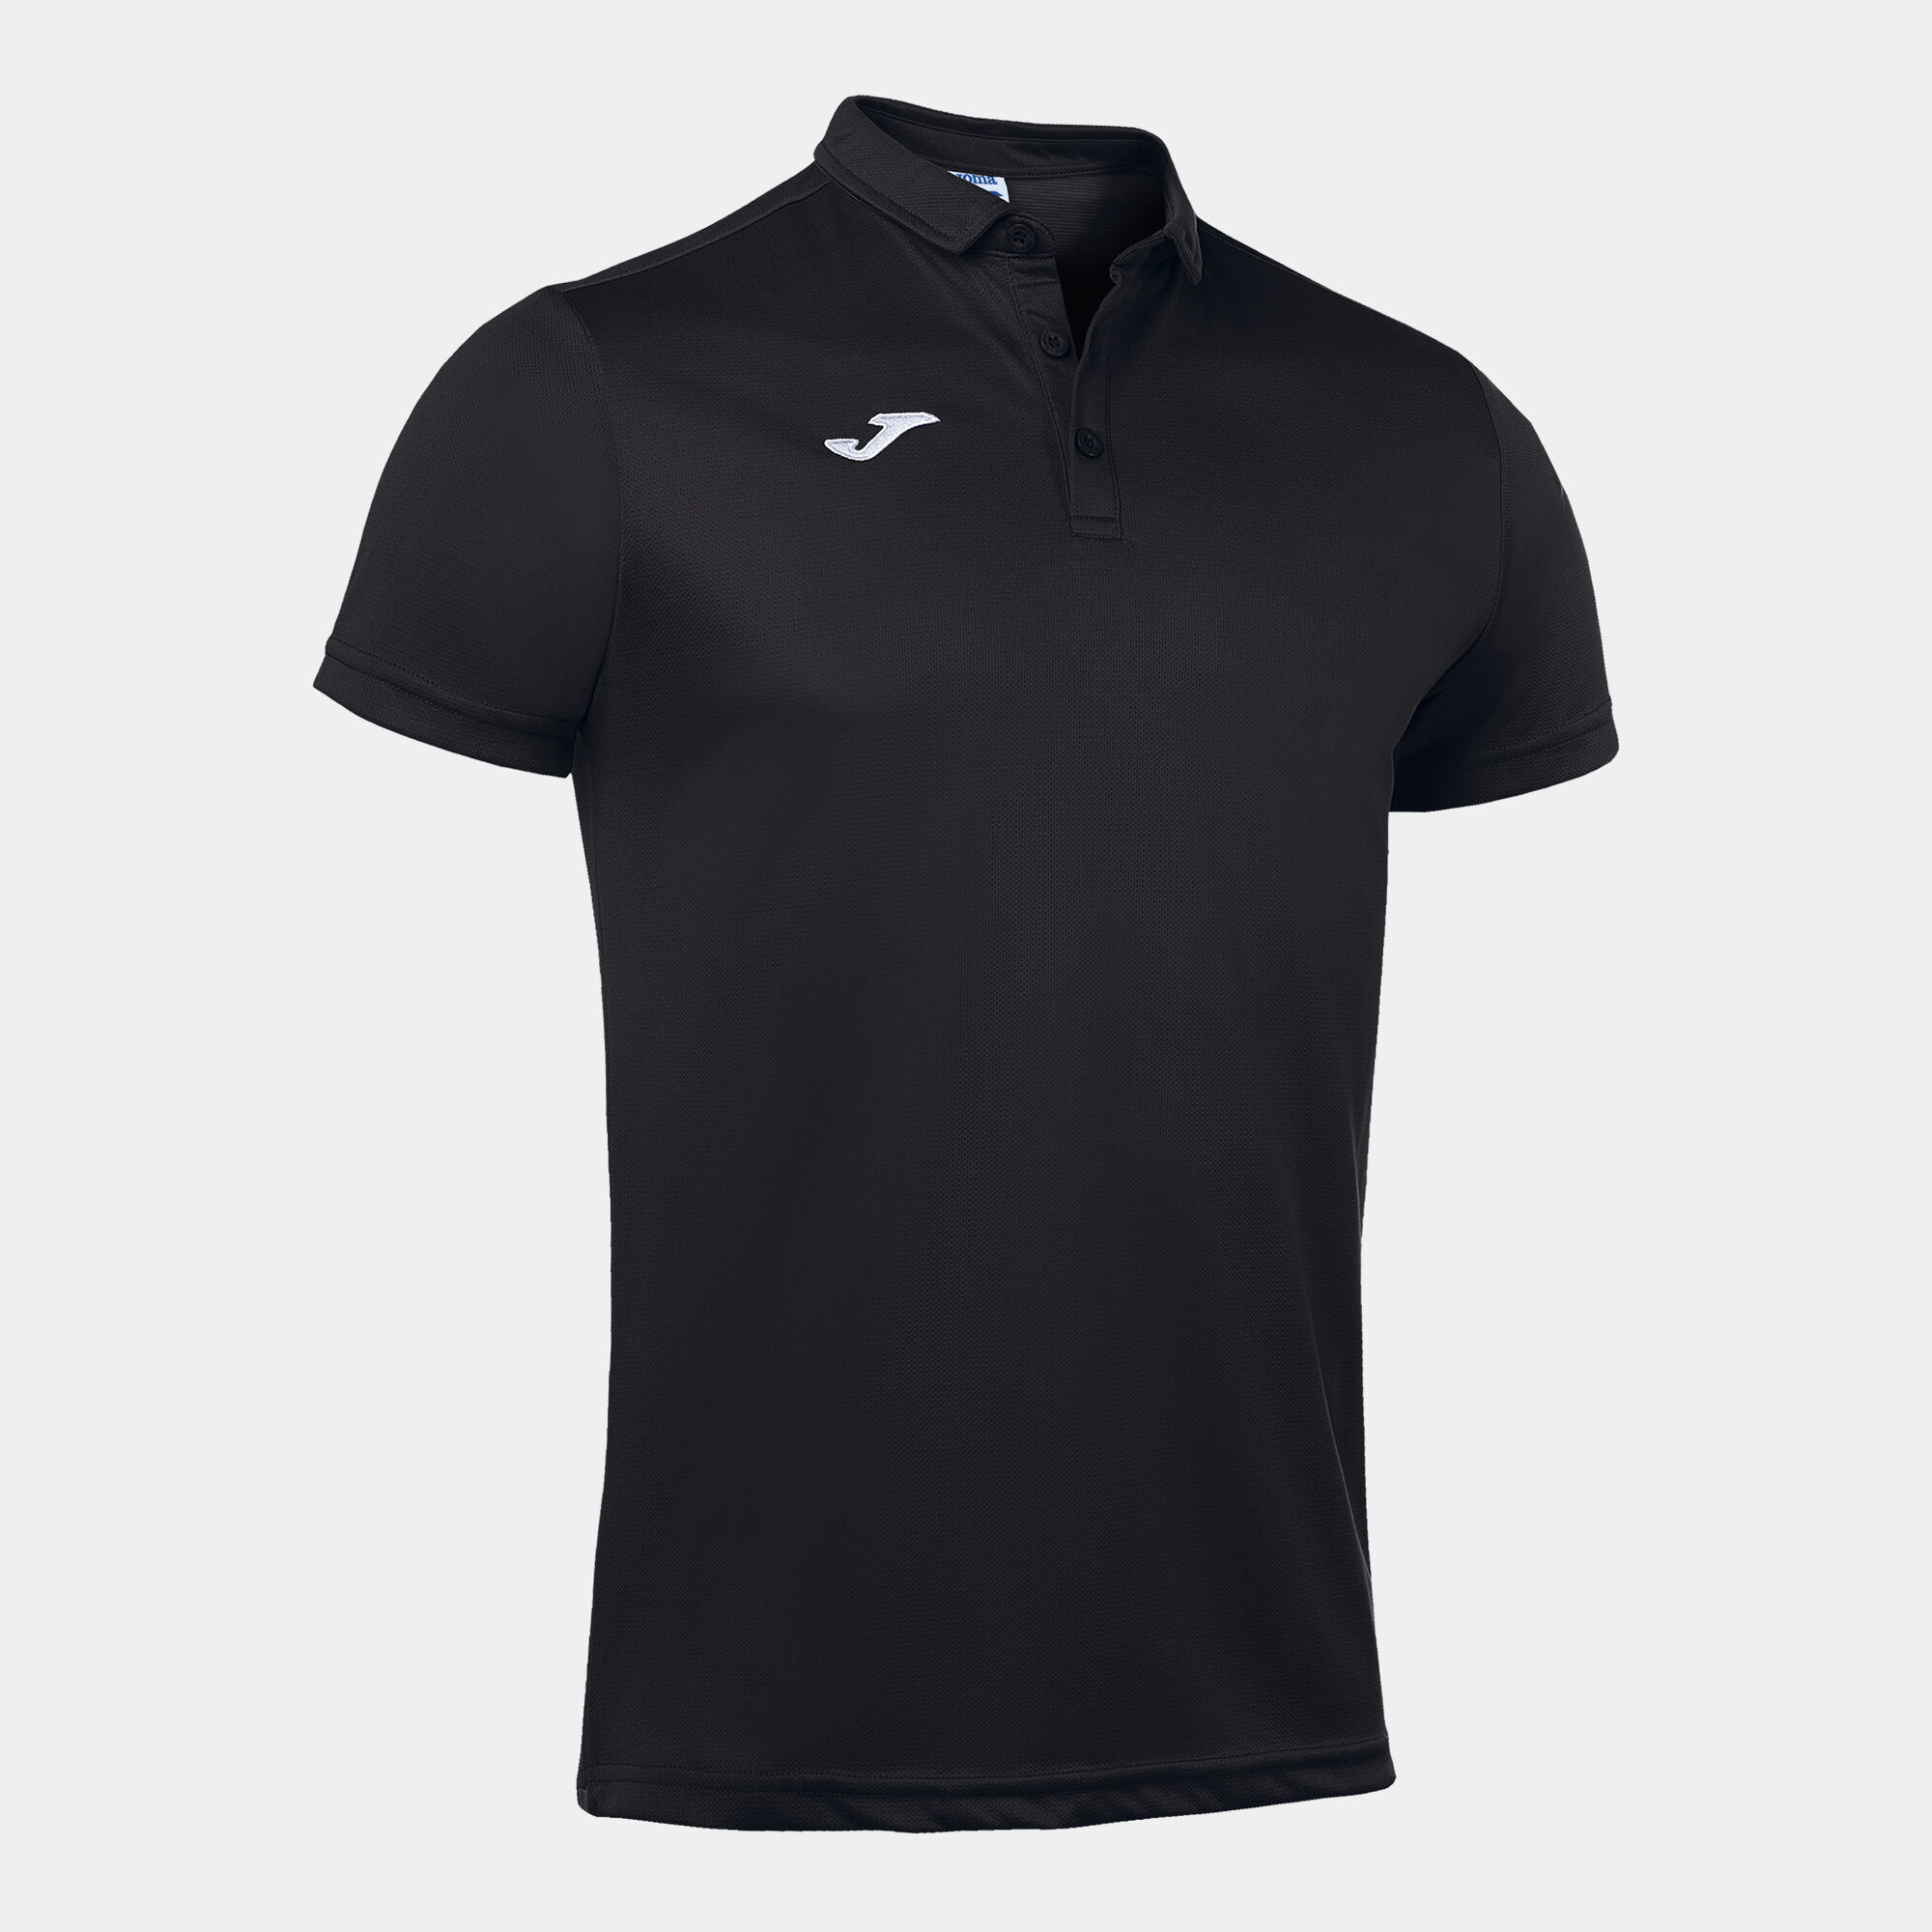 POLO MANCHES COURTES HOMME HOBBY NOIR